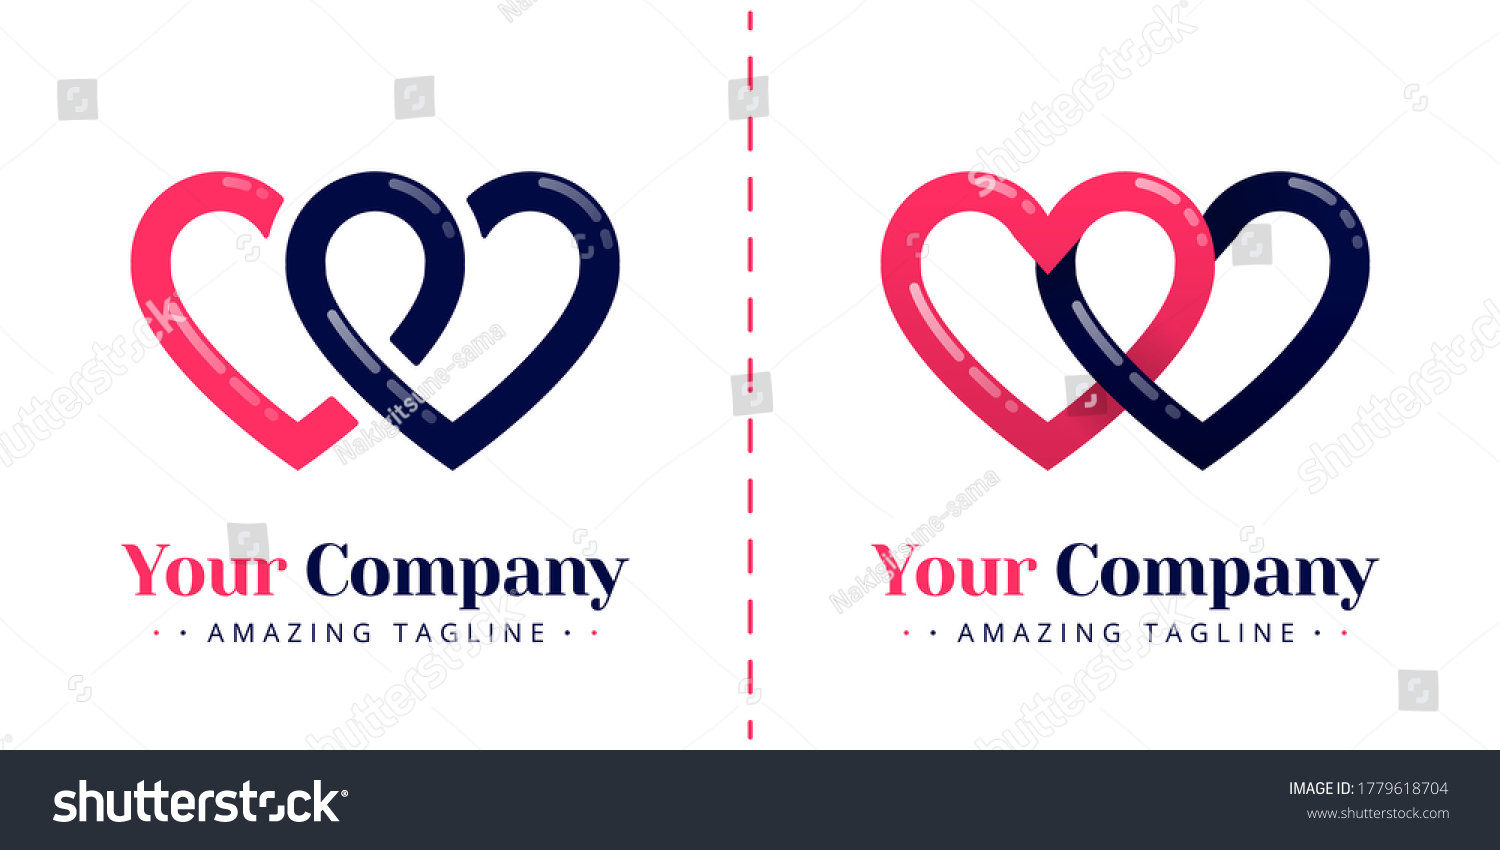 SVG of Double love logo for connected and infinity relationships. Templates can be used for corporate, dating apps, business wedding events, poster, brochure, wedding invitation, card, website, banner svg